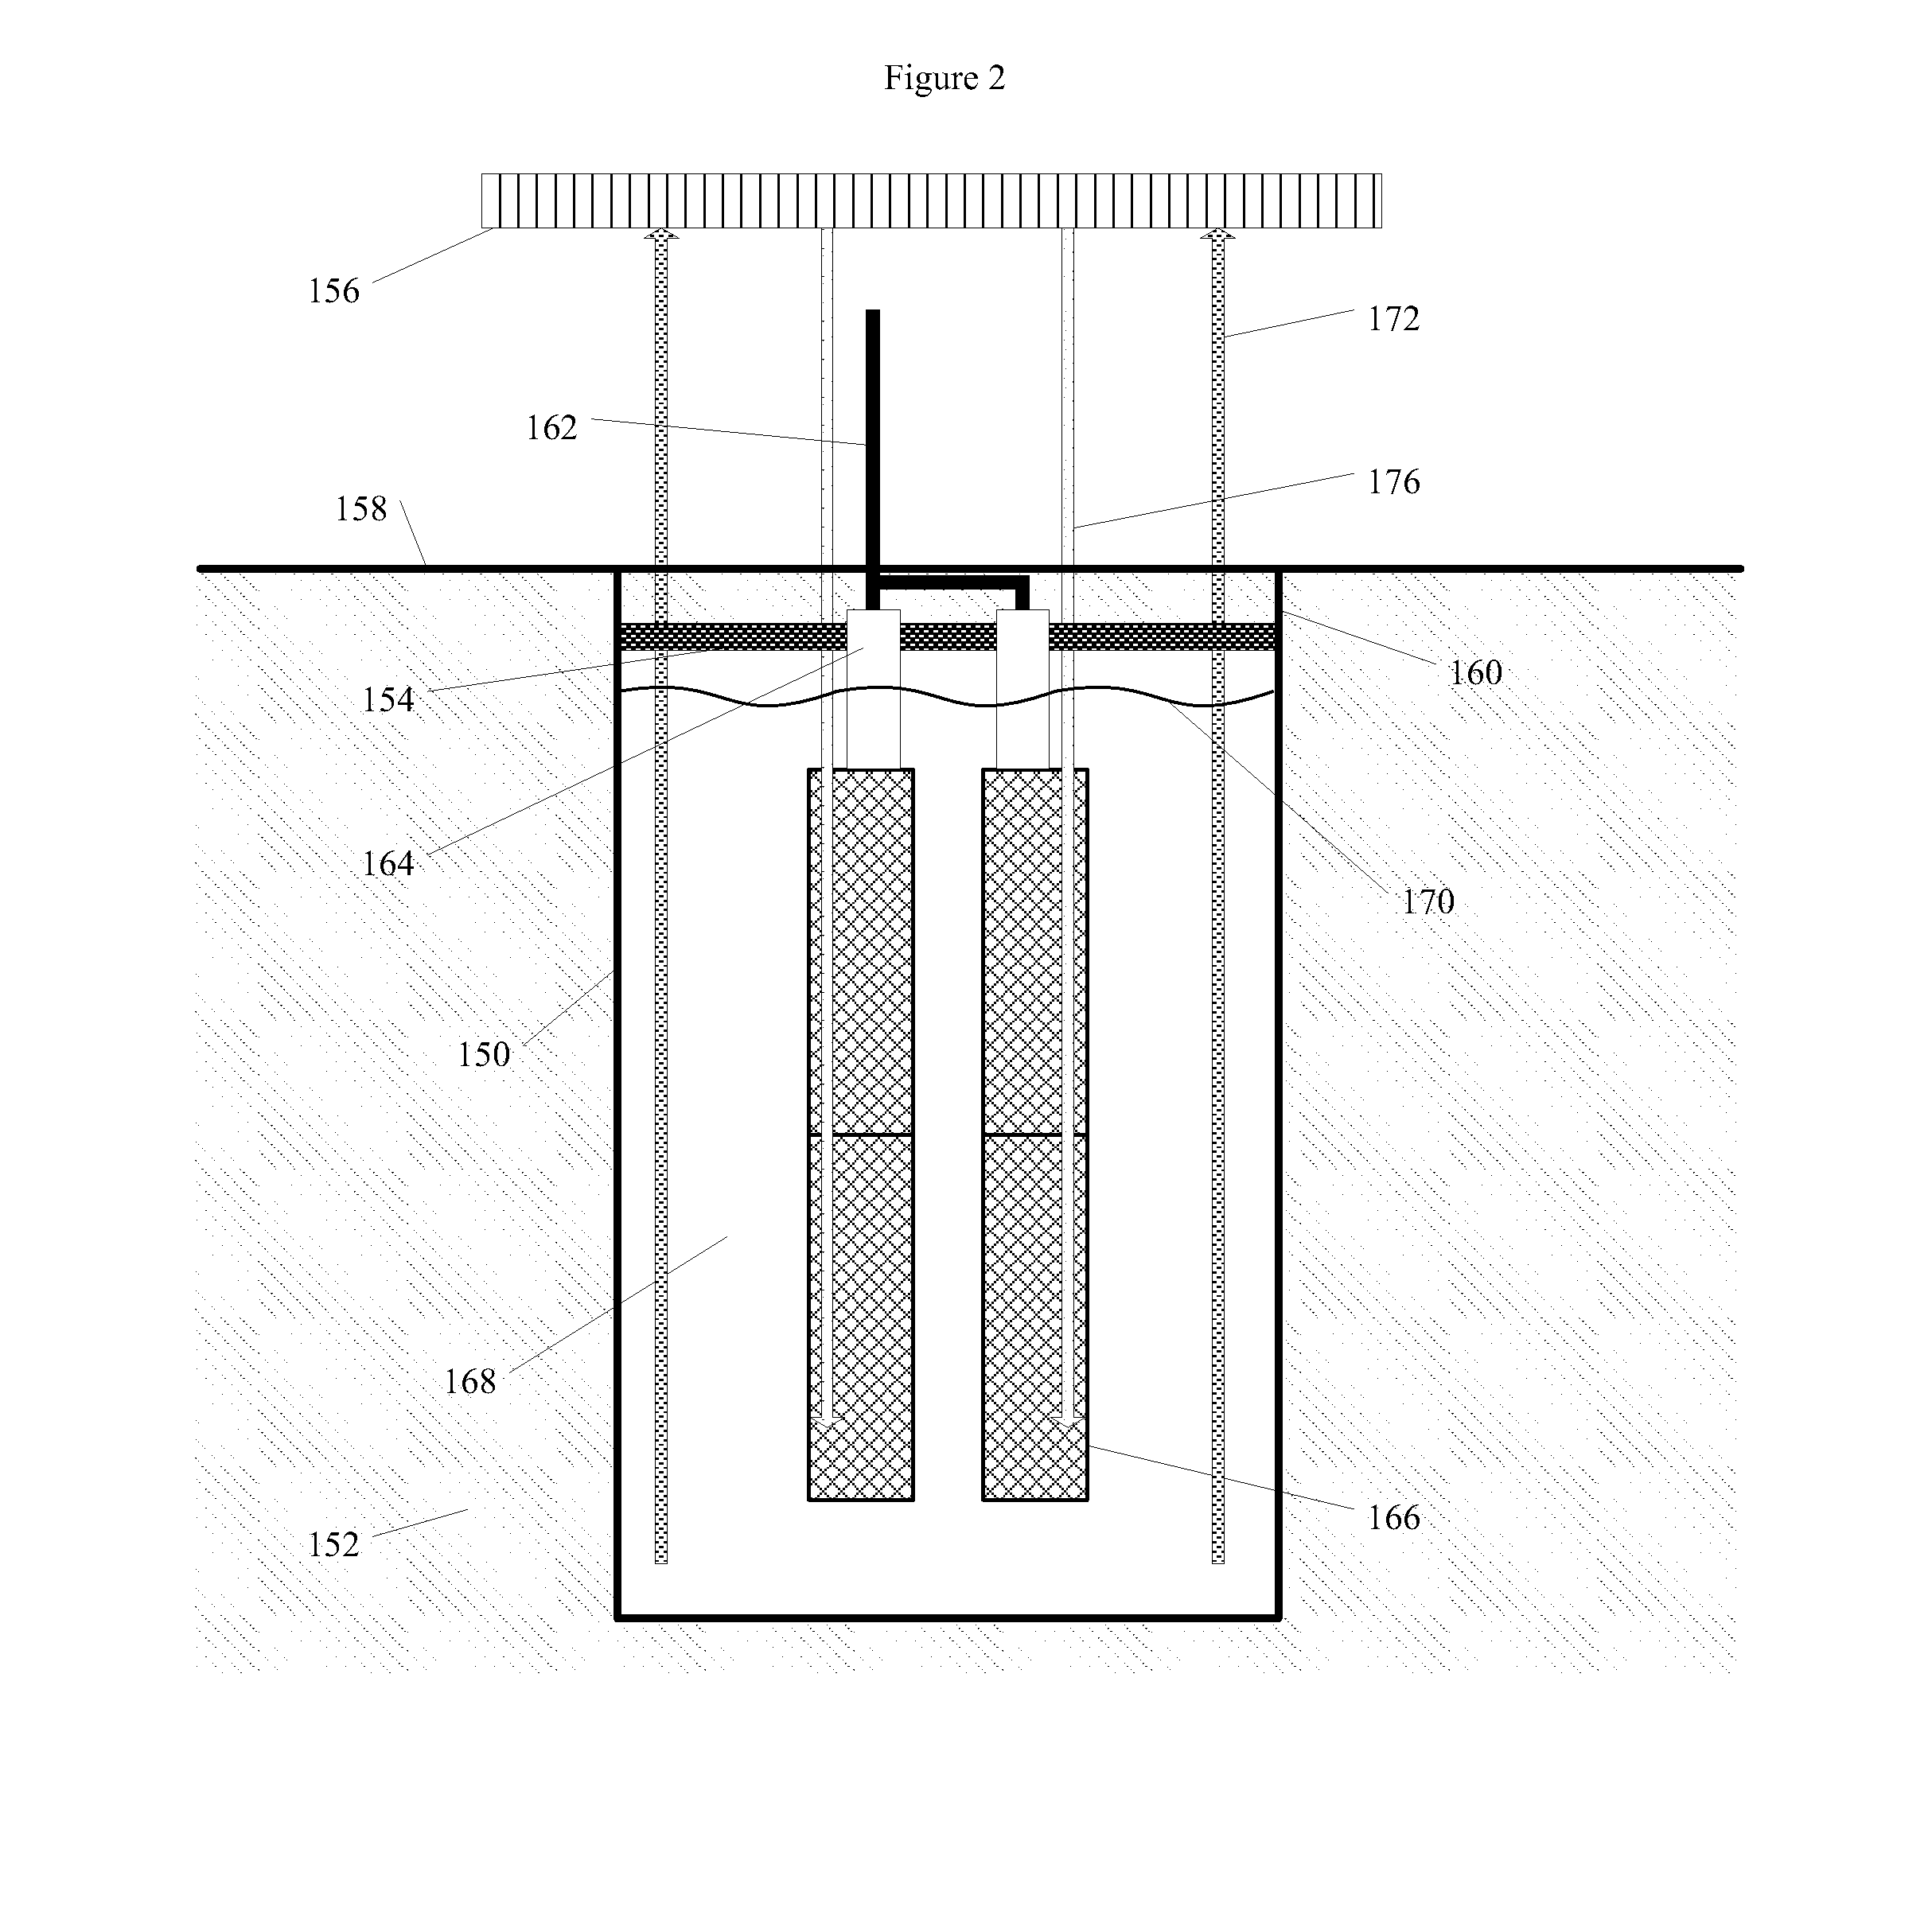 Apparatus and method for geothermally cooling electronic devices installed in a subsurface environment